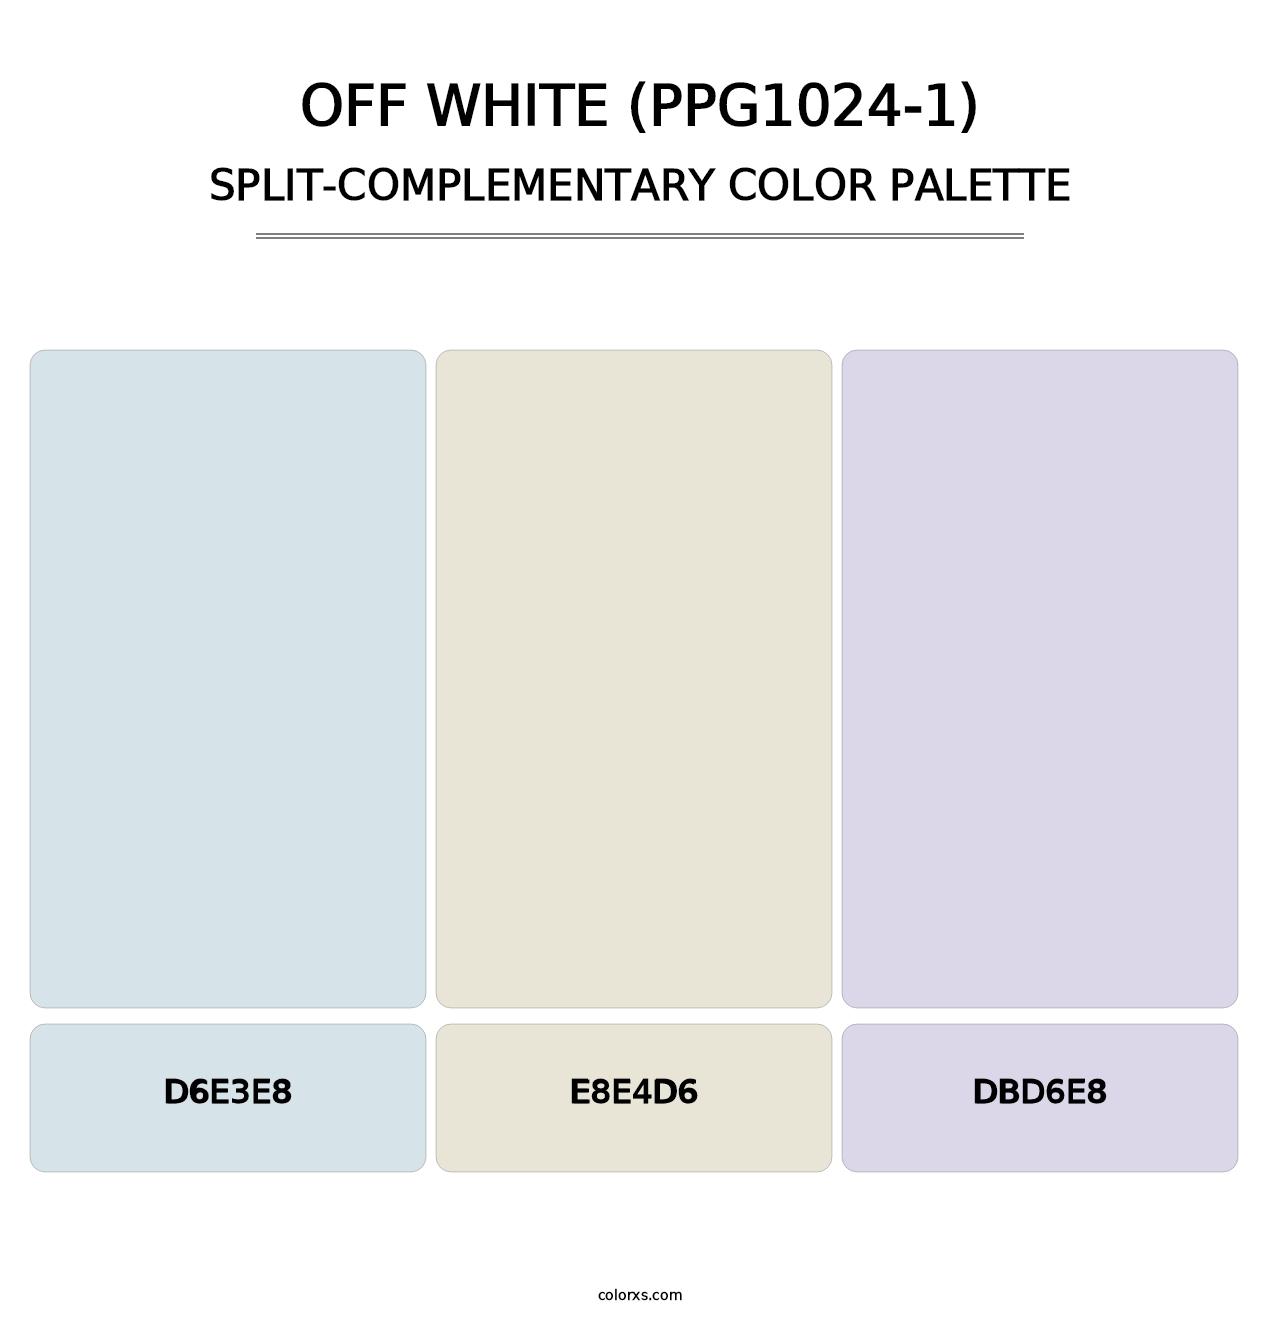 Off White (PPG1024-1) - Split-Complementary Color Palette